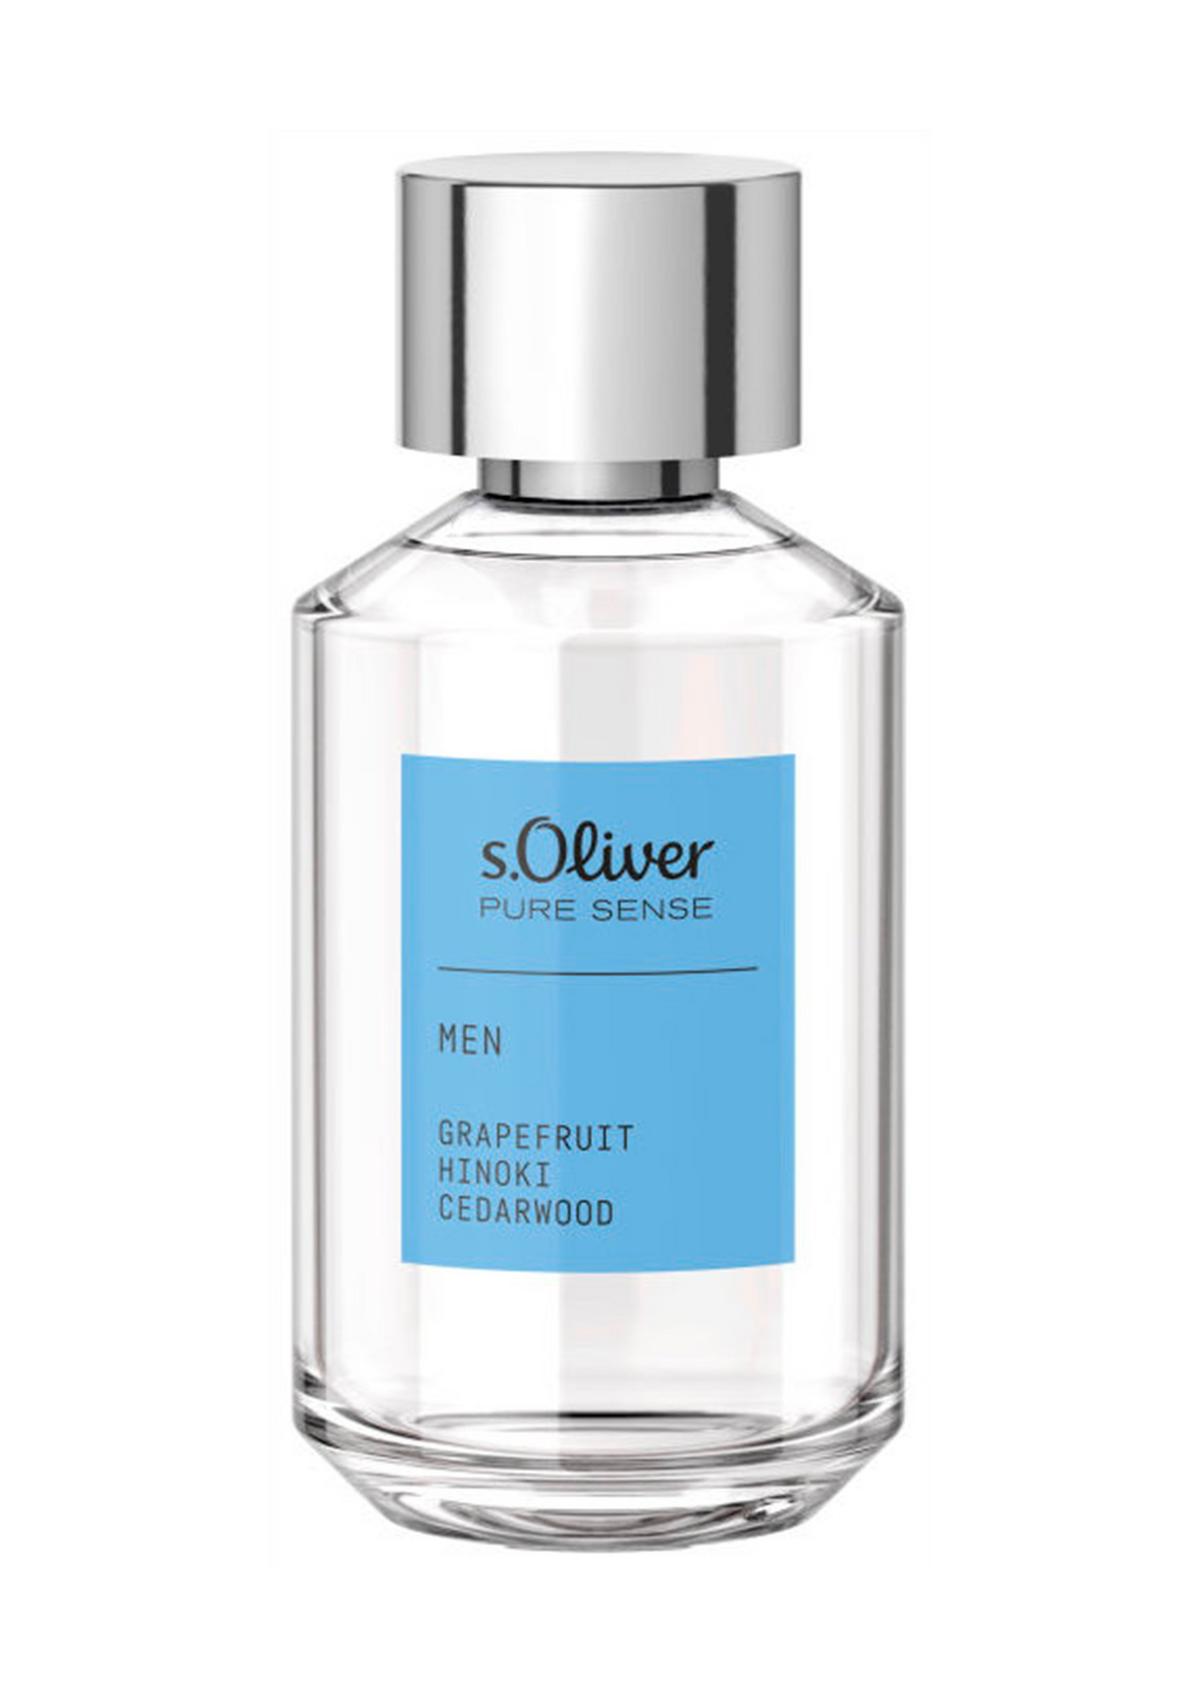 SELECTION BY S.OLIVER MEN perfume de S.Oliver – Wikiparfum